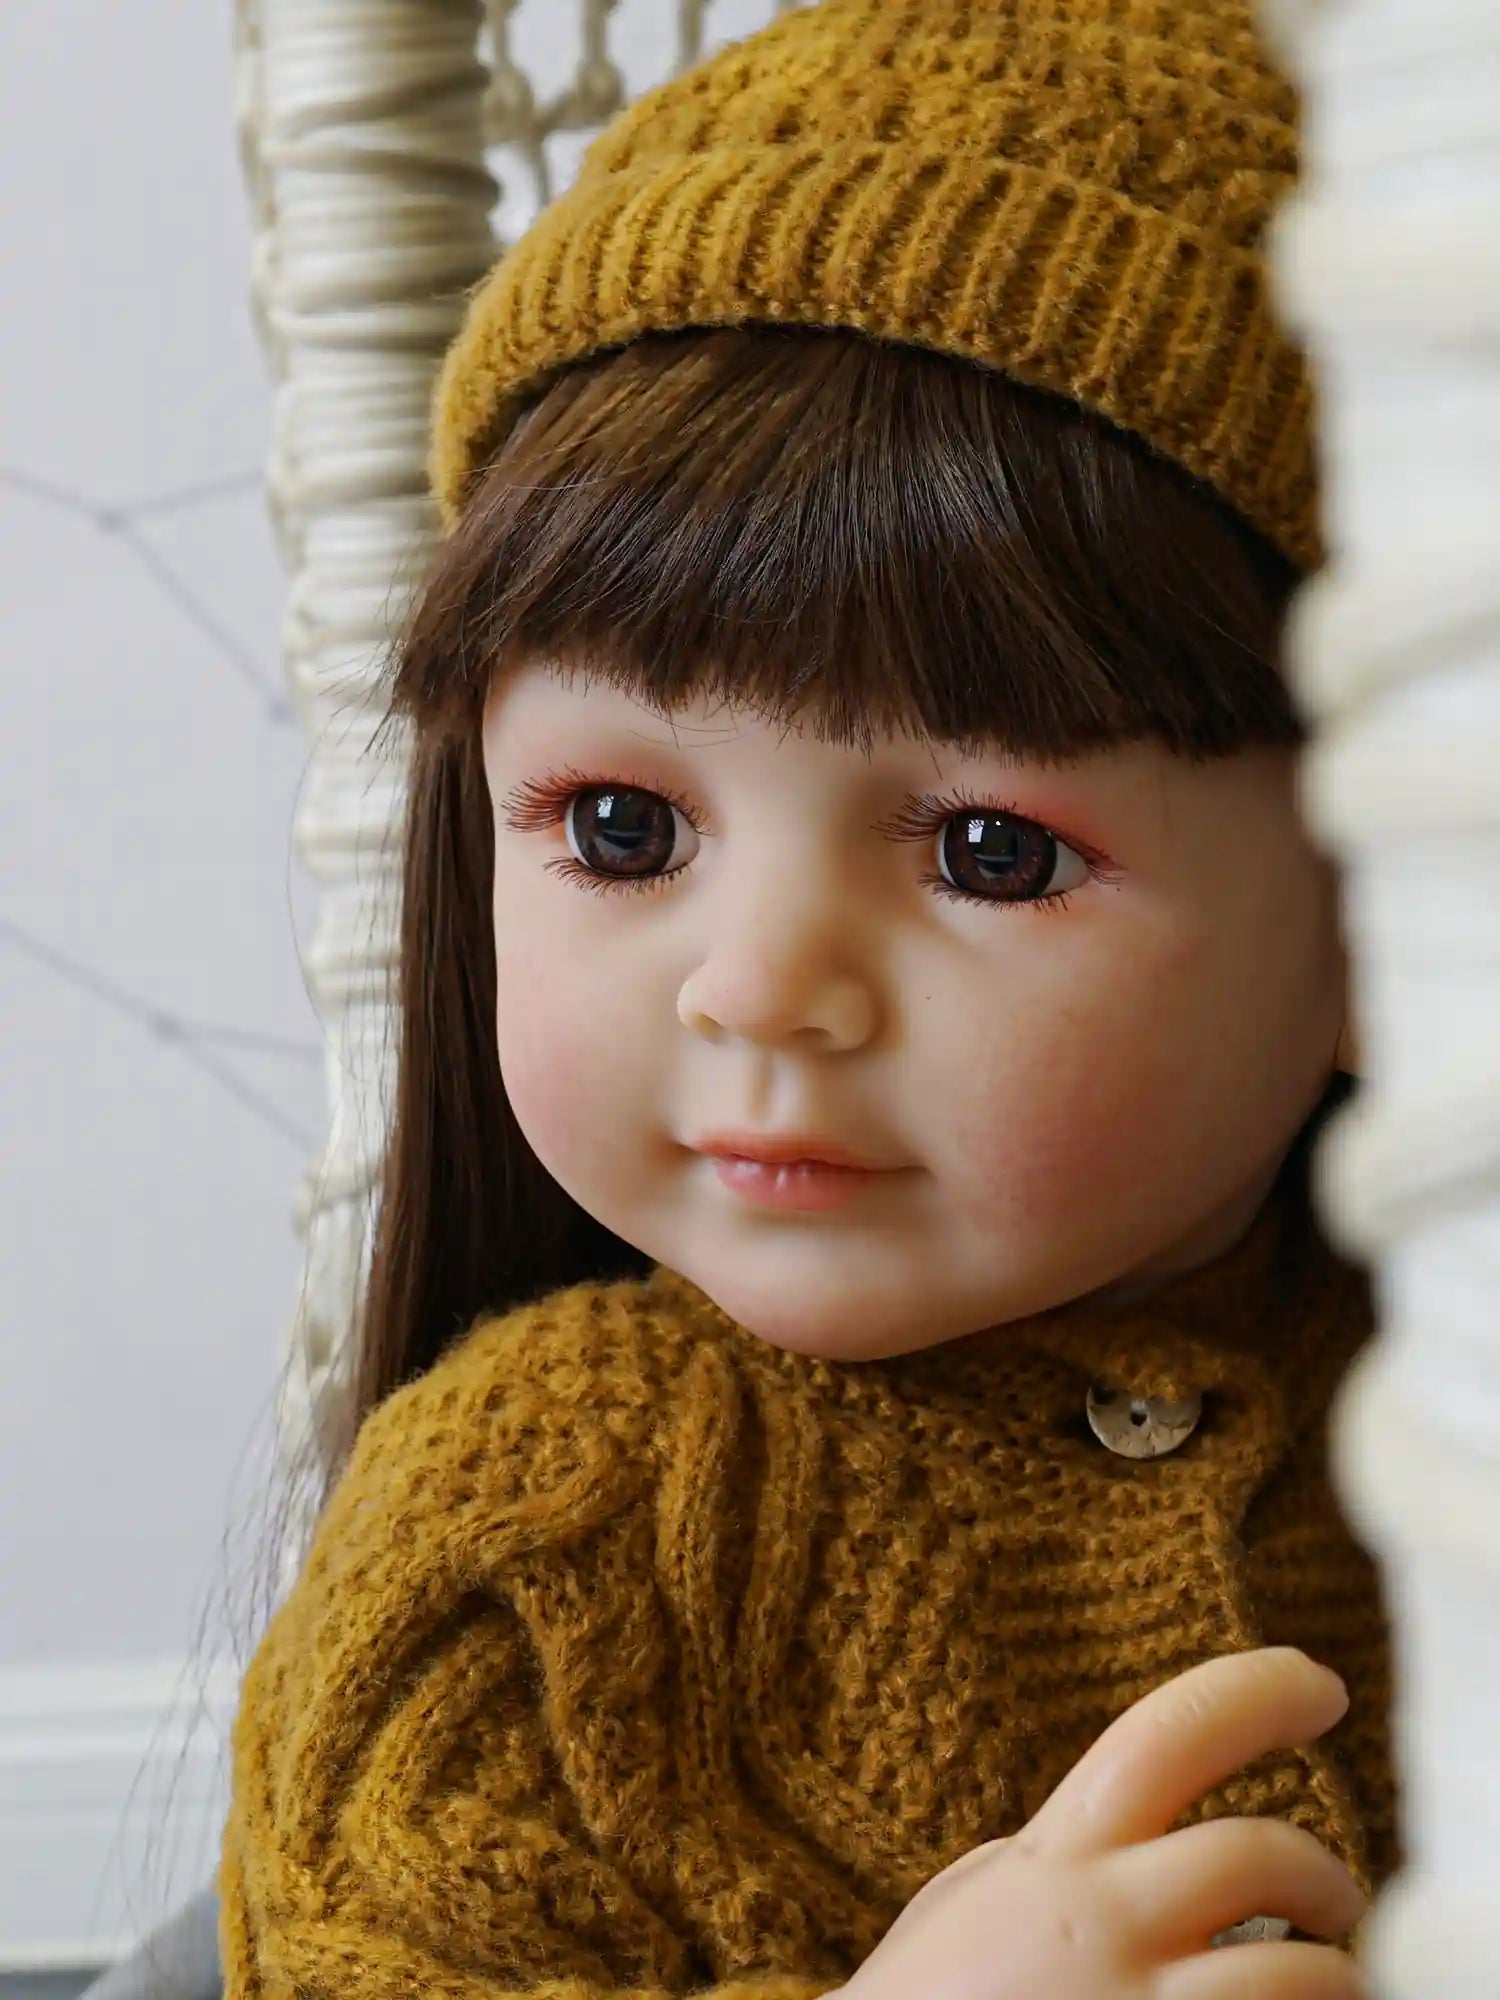 Doll with detailed features, including glossy brown hair and tender brown eyes, dressed warmly in a mustard-yellow sweater and hat, sitting against a gray patterned background.